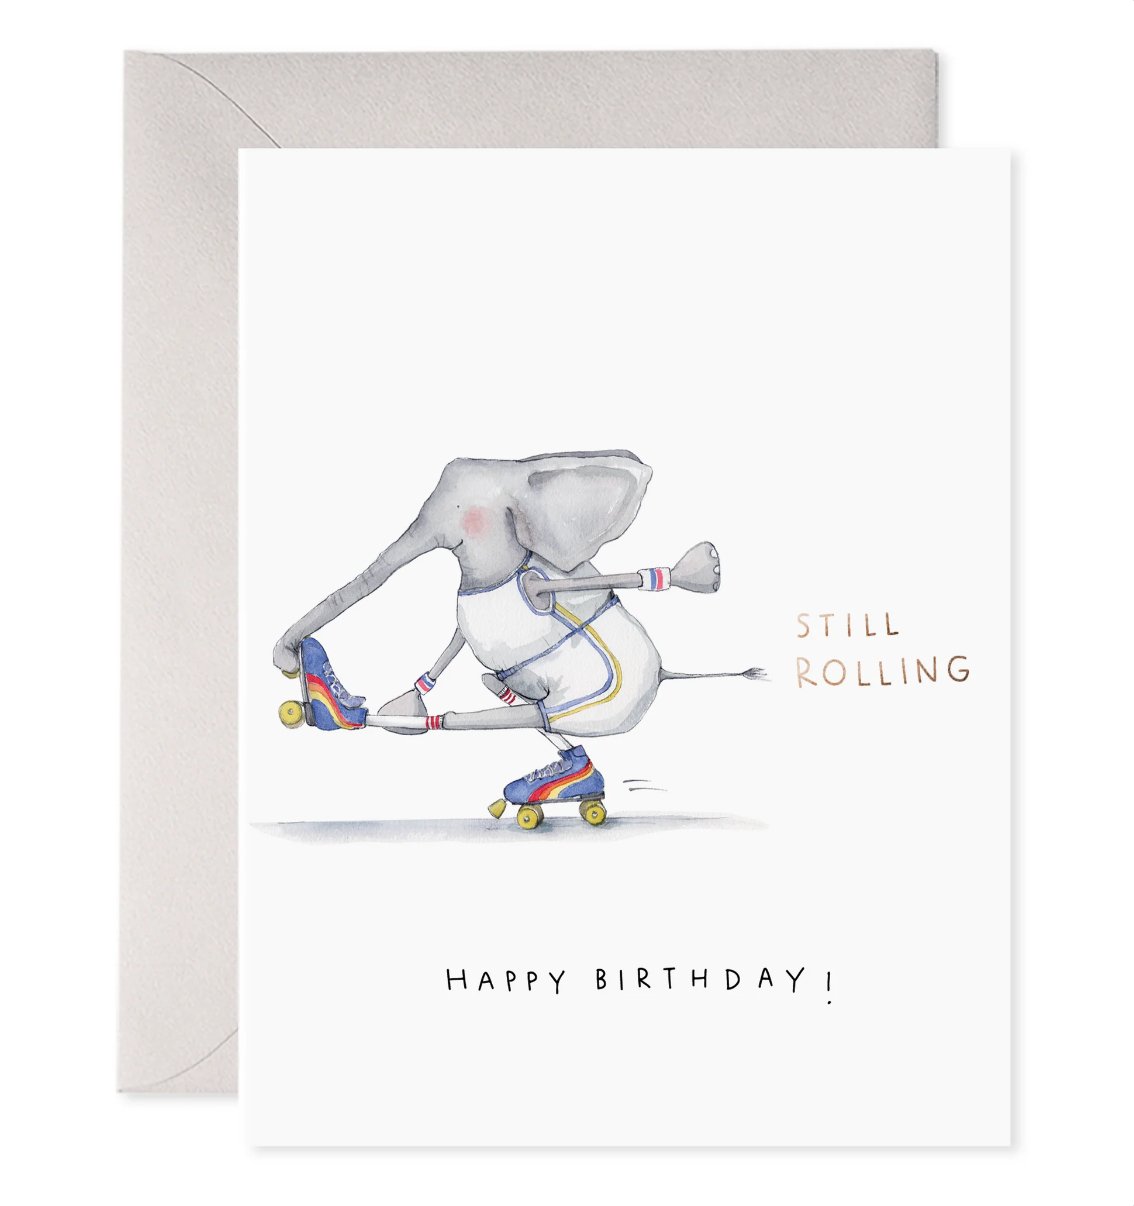 Birthday Cards by E. Frances - The Flower Crate